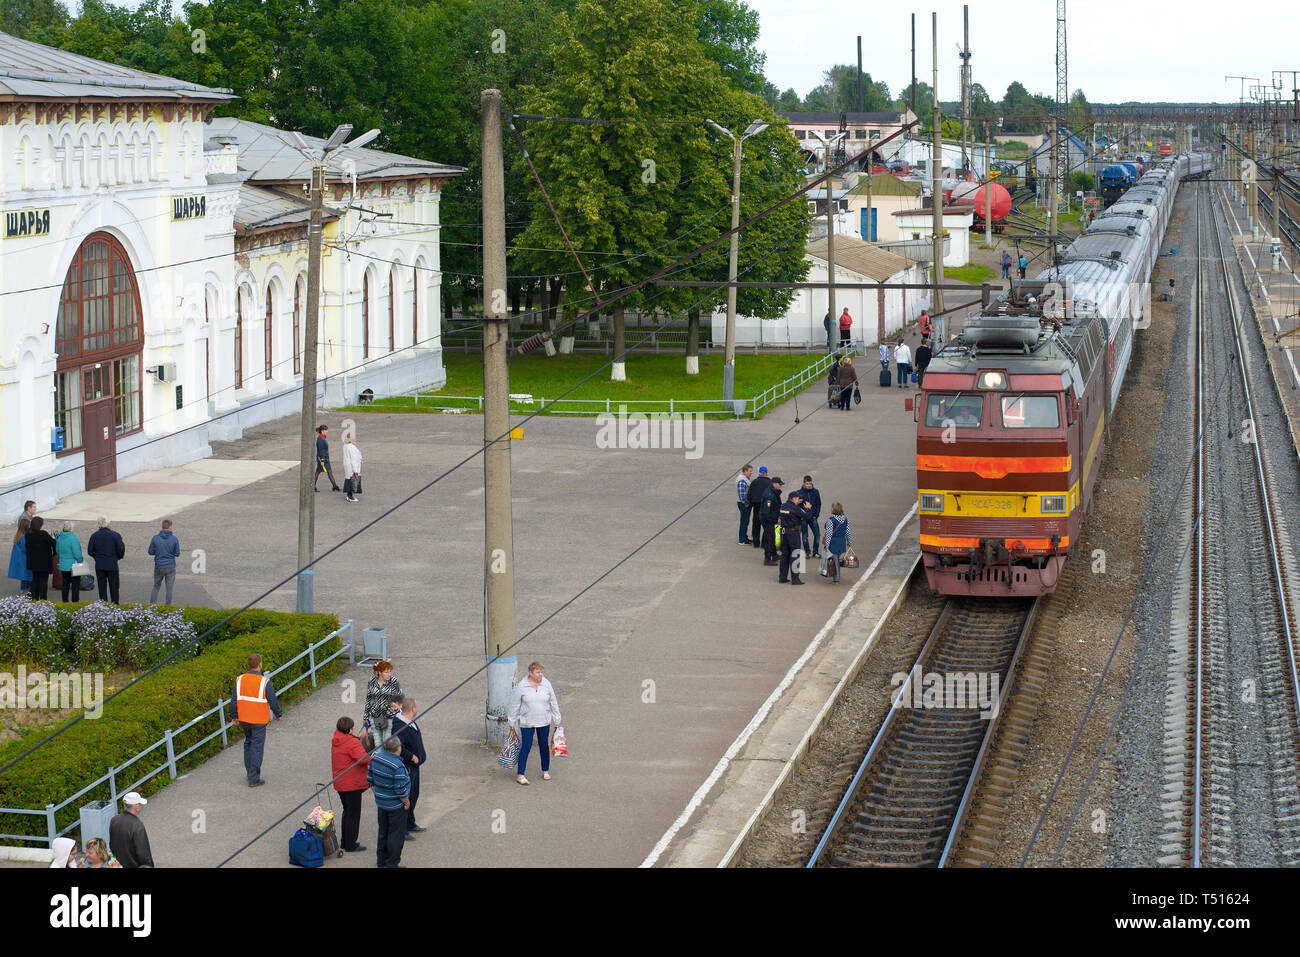 SHARYA, RUSSIA - SEPTEMBER 04, 2017: Passenger train with electric locomotive ChS4t arrives on the Sharya station of the Northern Railway Stock Photo